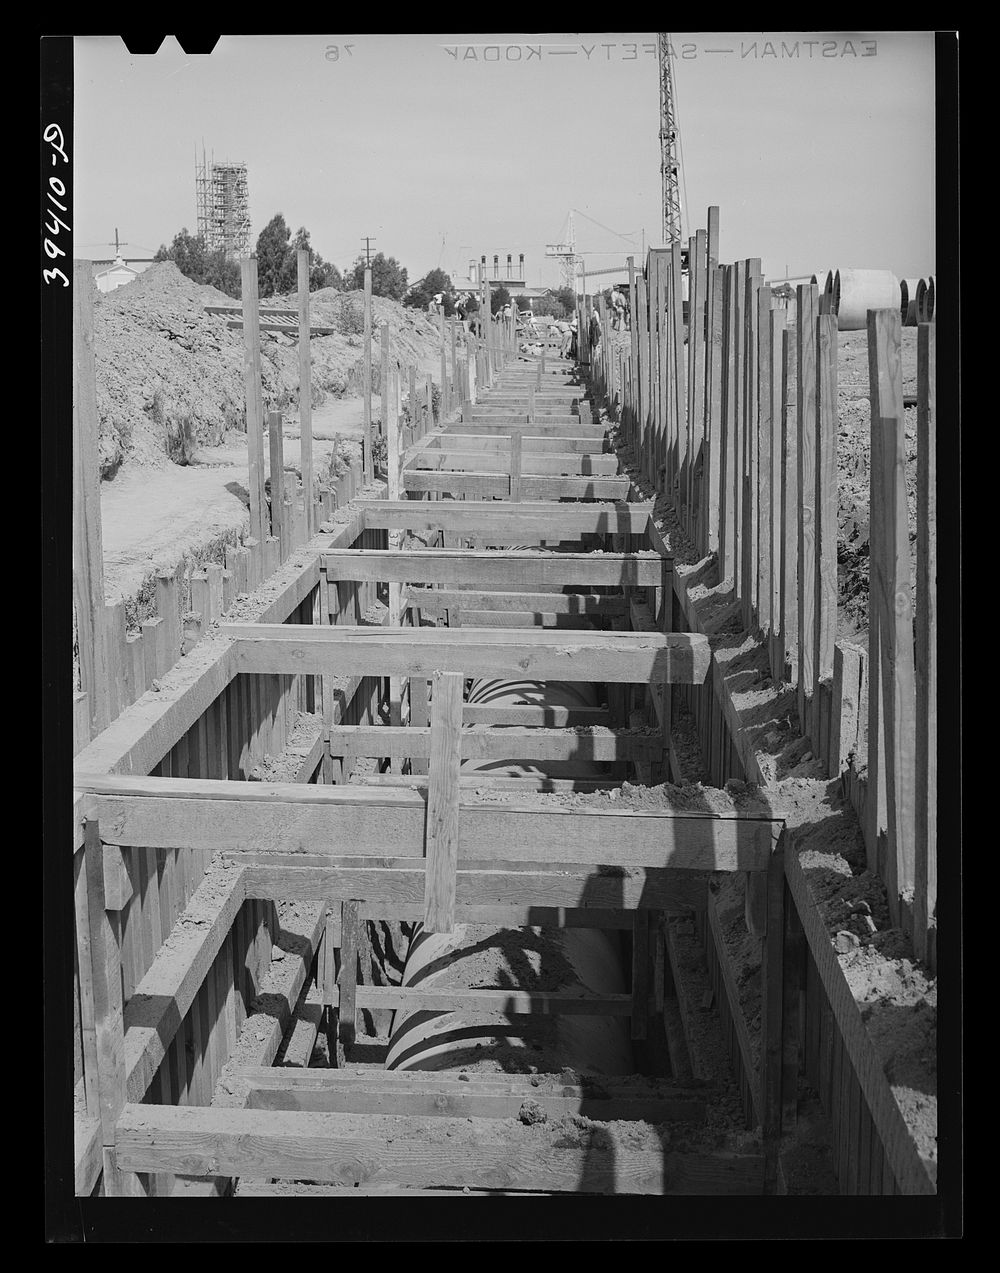 [Untitled photo, possibly related to: Construction work of the sewage disposal plant and sewer lines leading to it. About…